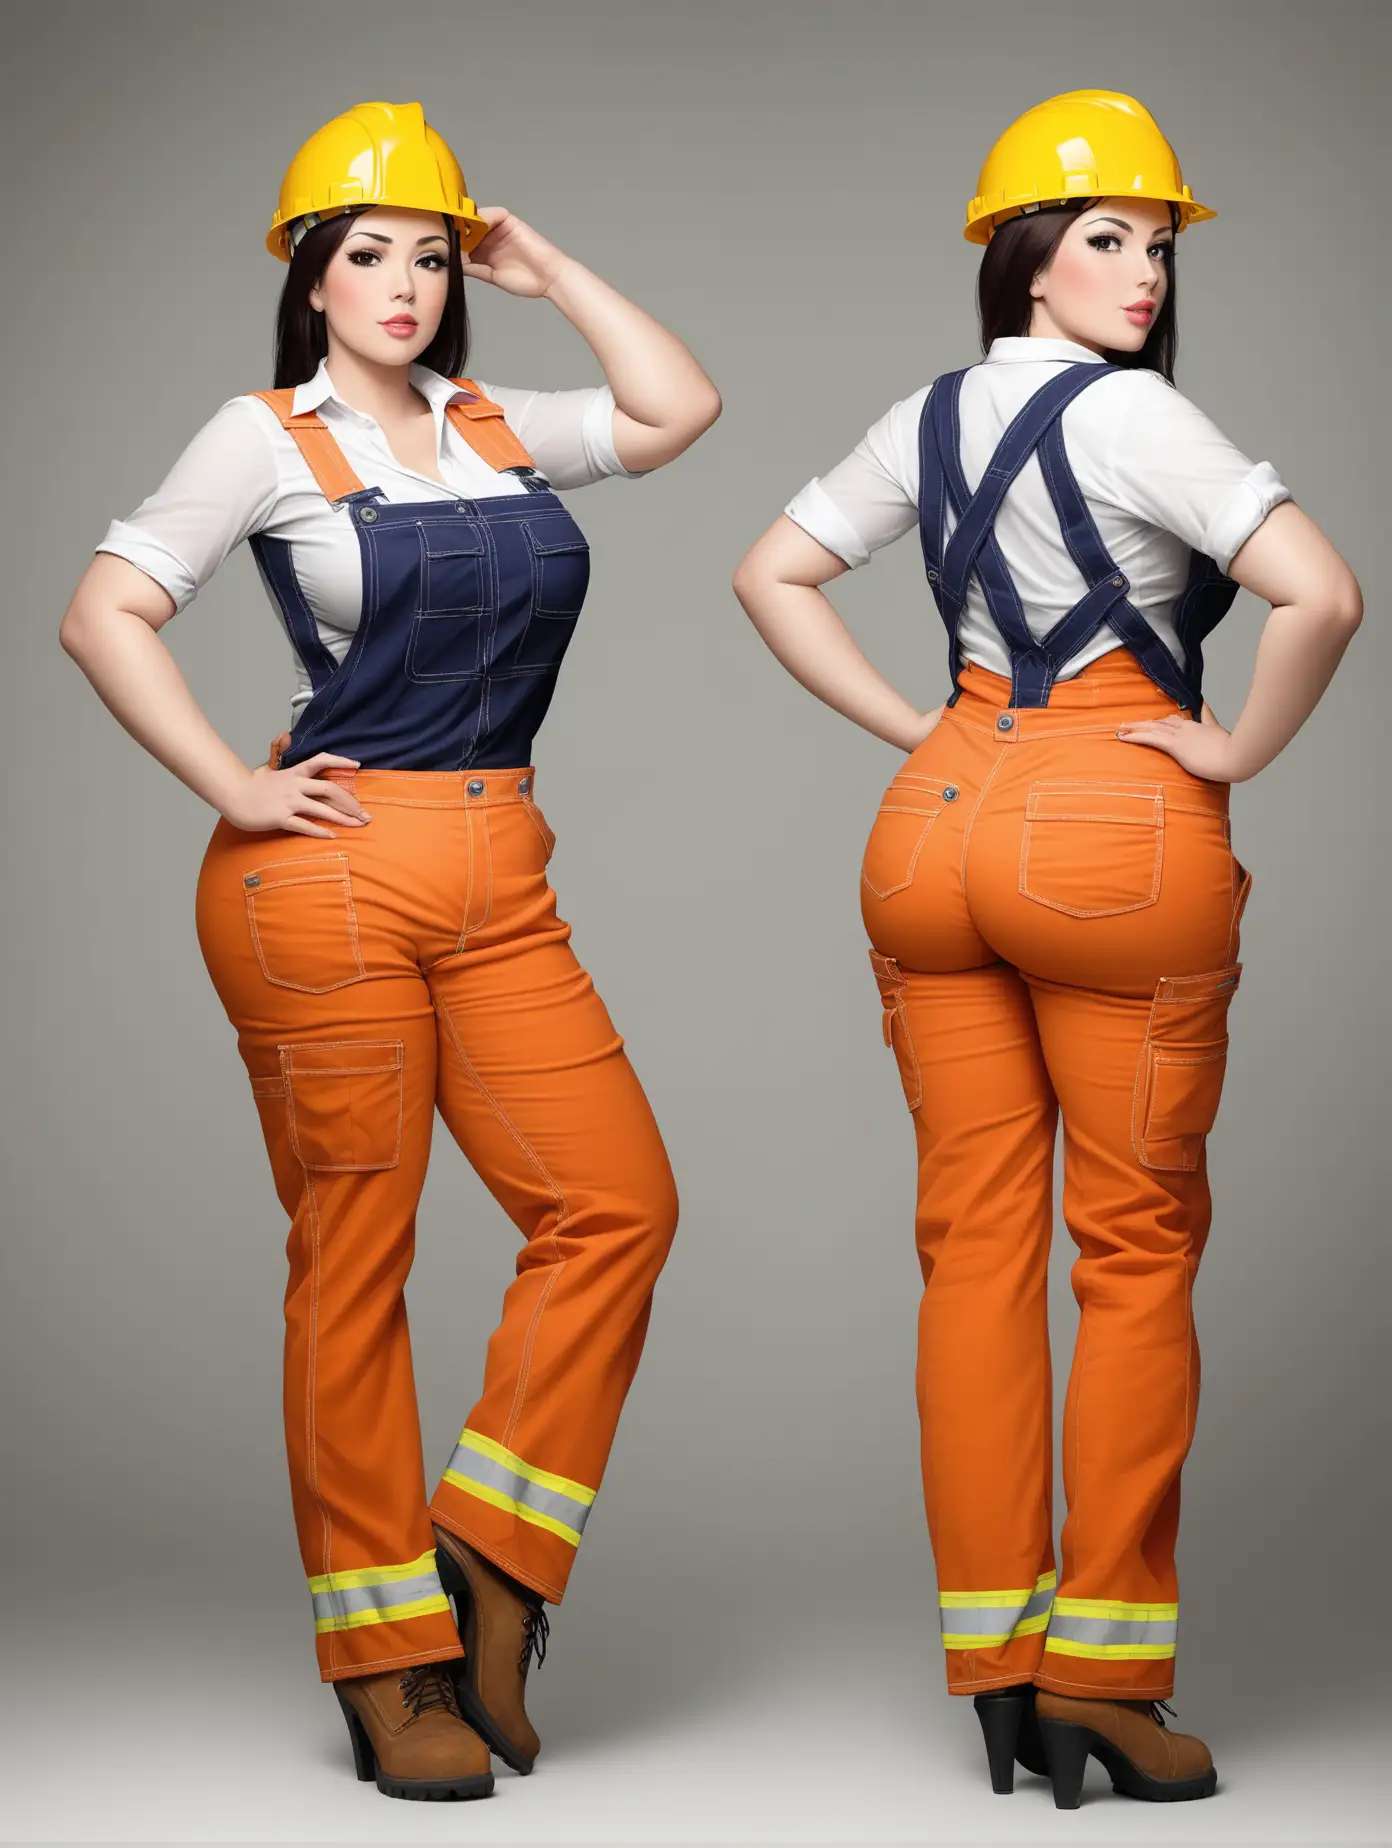 Seductive-Female-Construction-Worker-Poses-with-Emphasis-on-Curves